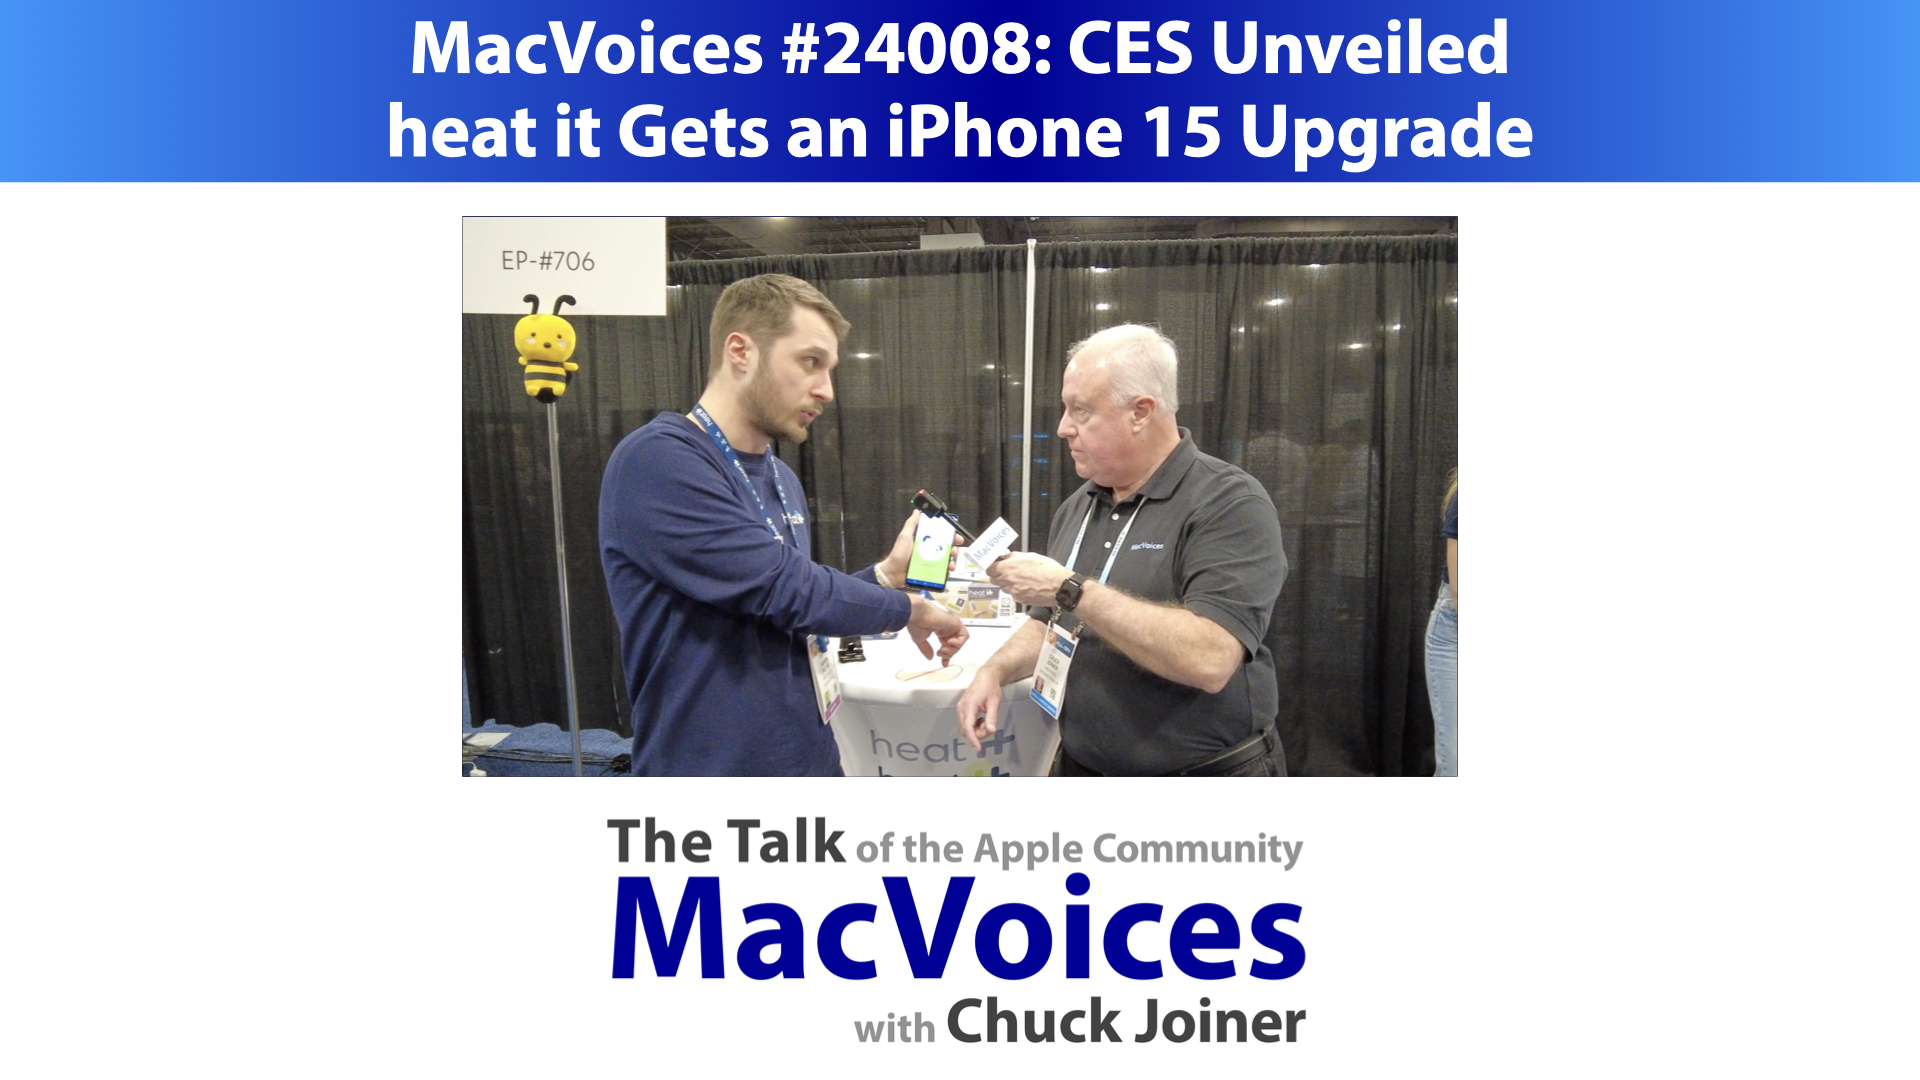 MacVoices #24008: CES Unveiled - heat it Gets an iPhone 15 Upgrade -  MacVoices